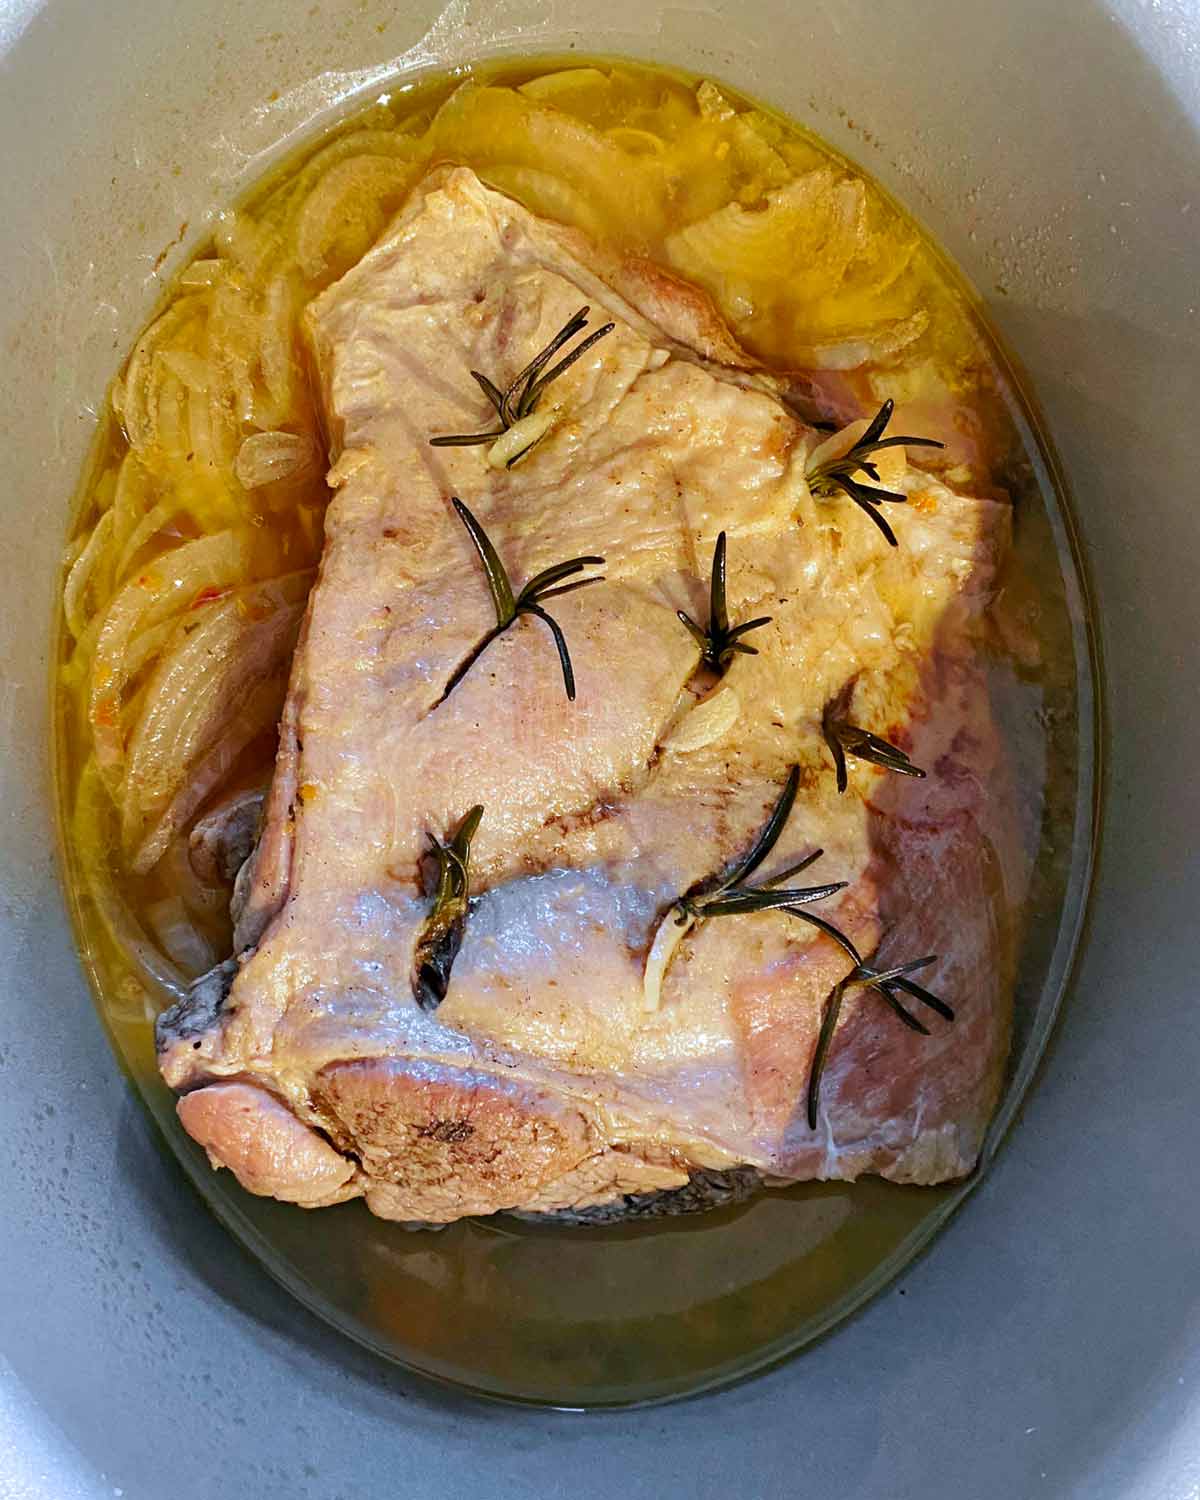 Cooked lamb shoulder in the slow cooker.